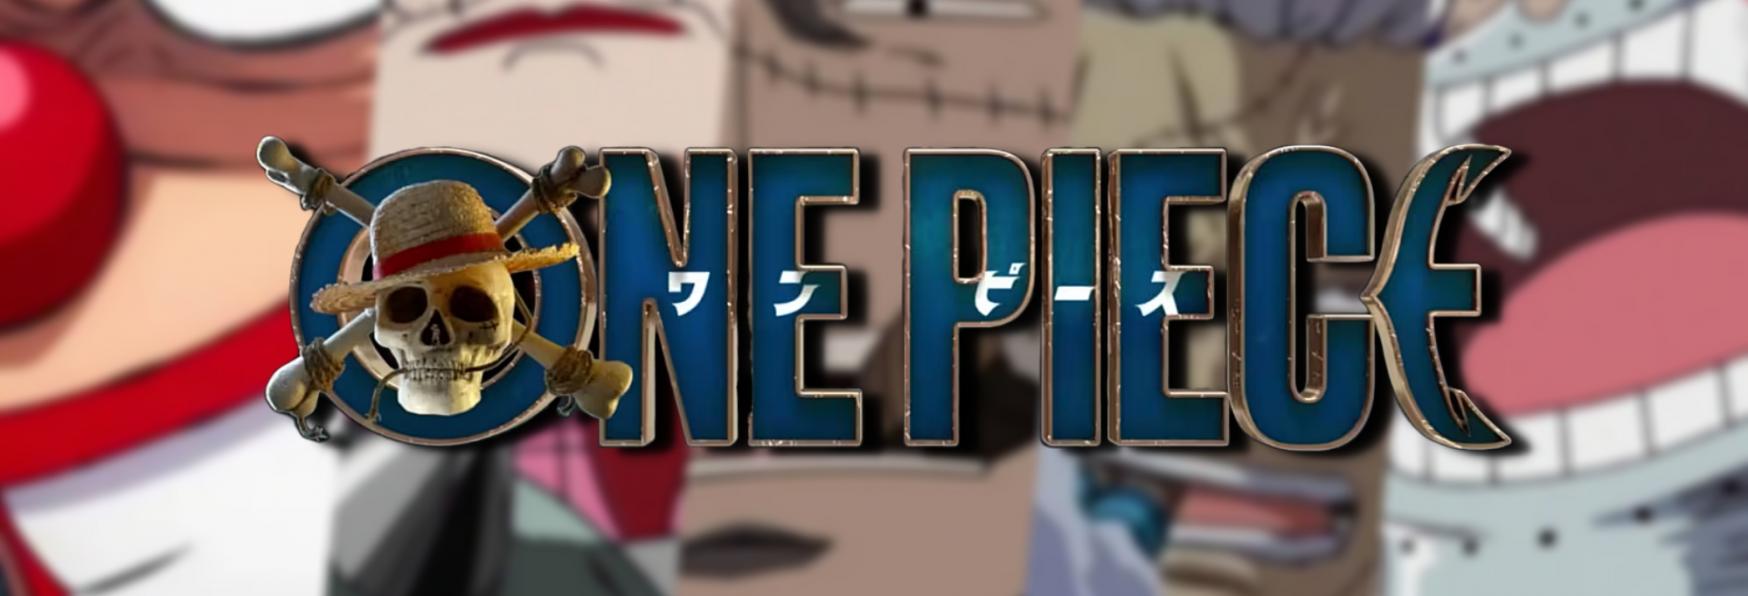 One Piece 2: Which Villains could we see in the Next Season?